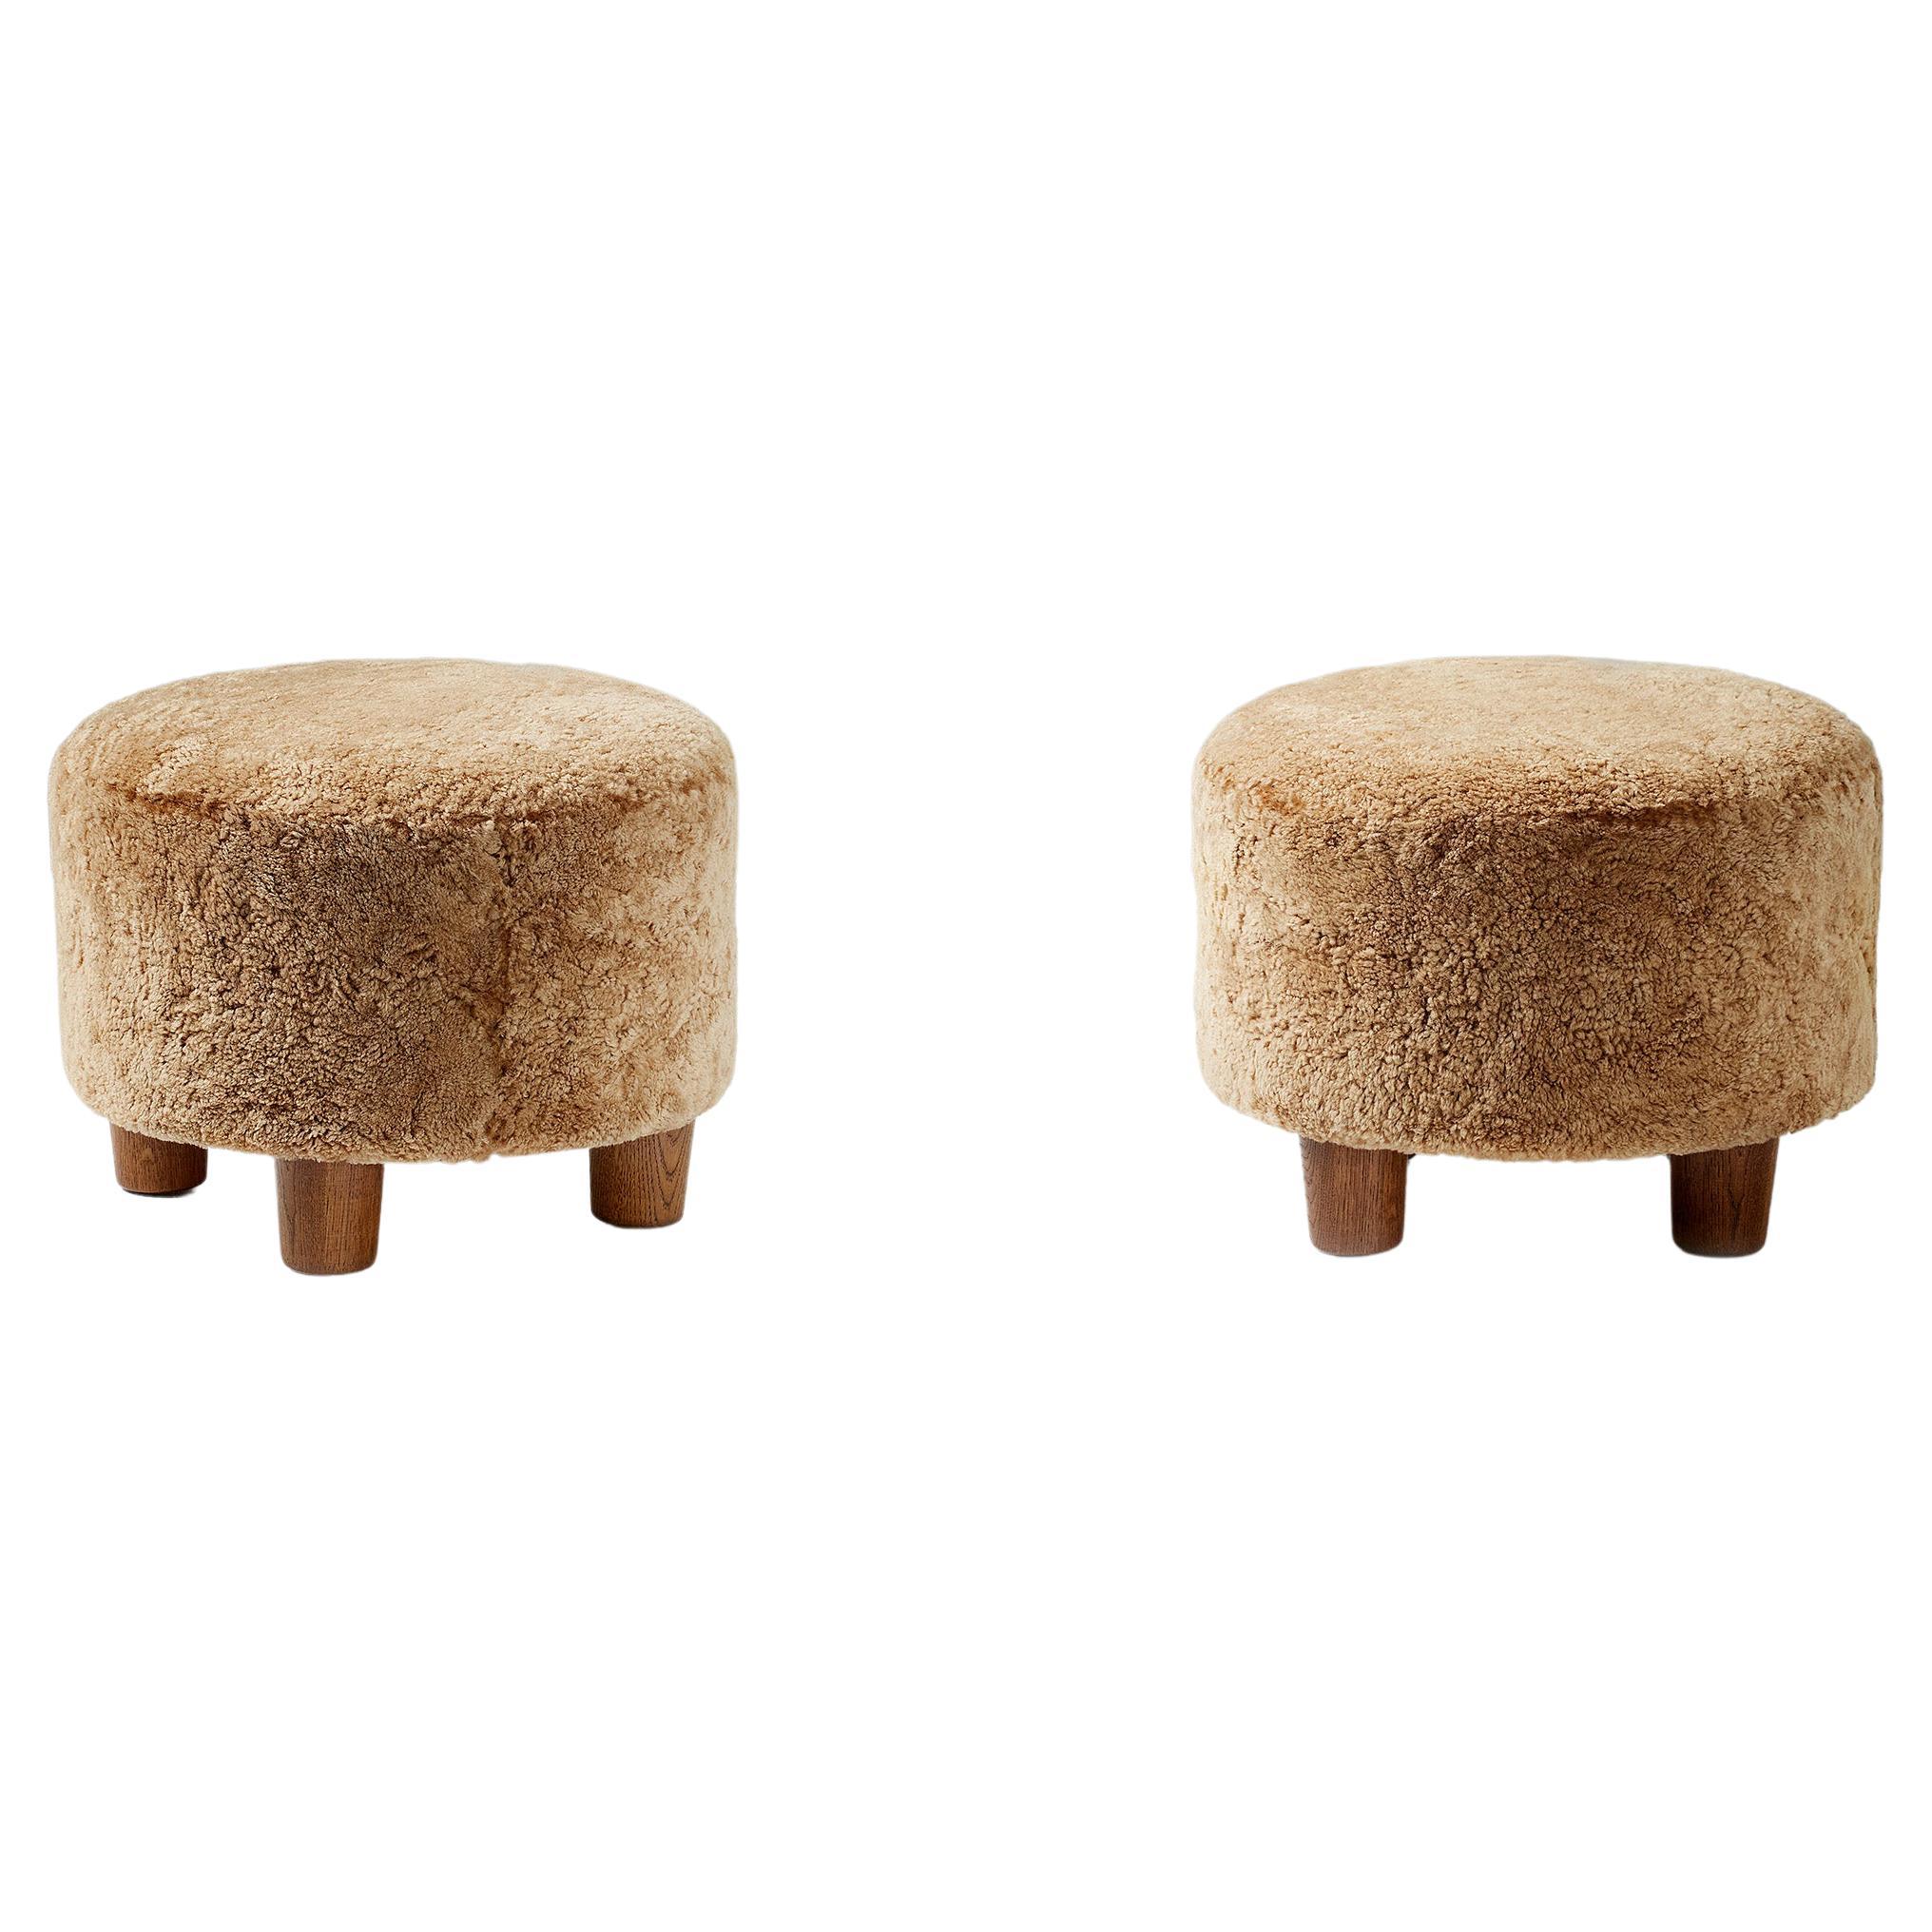 Custom-made ottomans developed & produced at our workshops in London using the highest quality materials. These examples are upholstered in a 'Maple' sheepskin and feature oiled and fumed oak feet.

A range of other sheepskin, fabric and wood